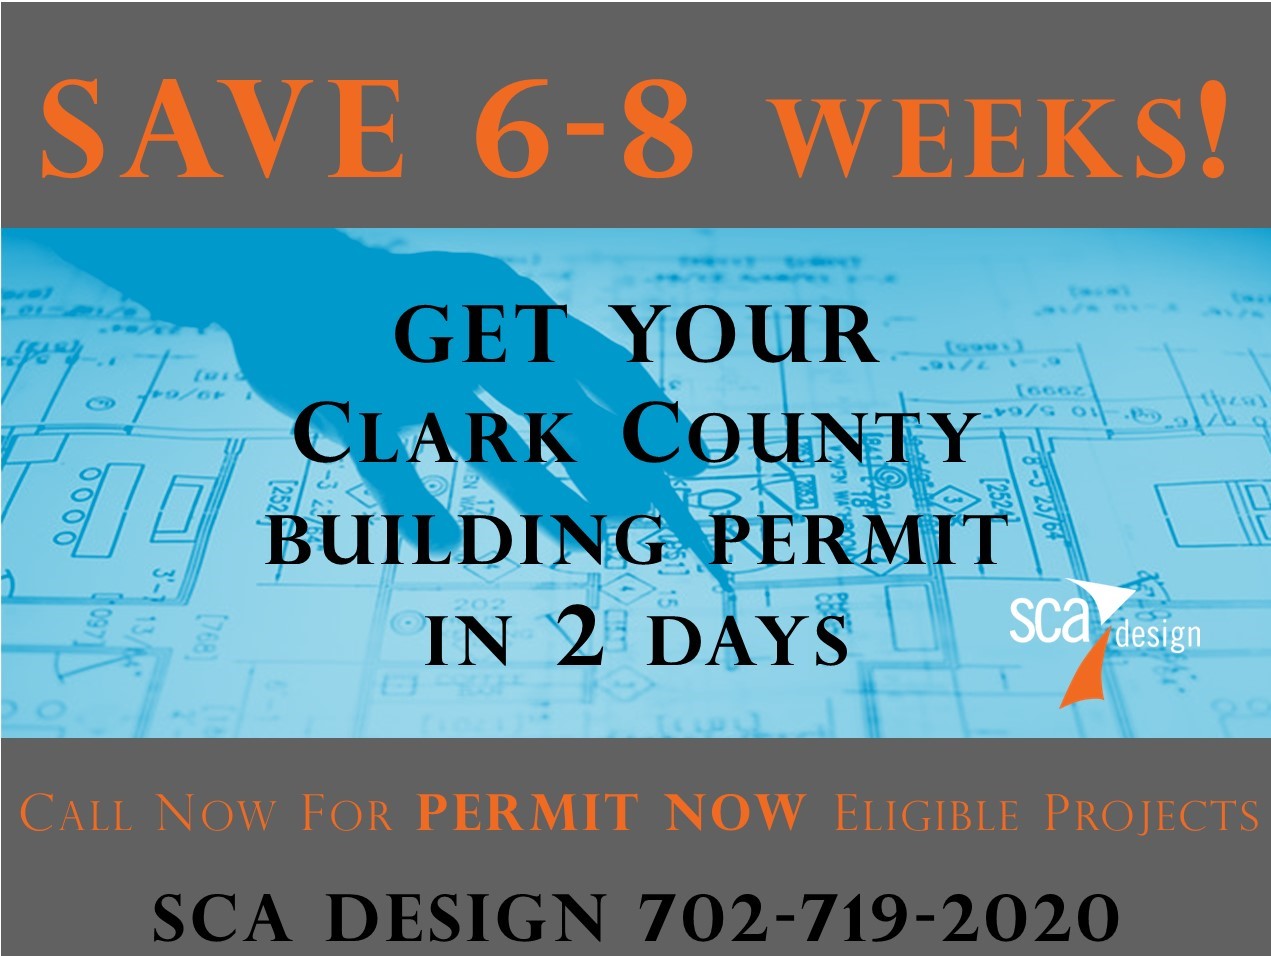 permit-now-by-top-architect-sca-design-nevada-architect-7027192020.